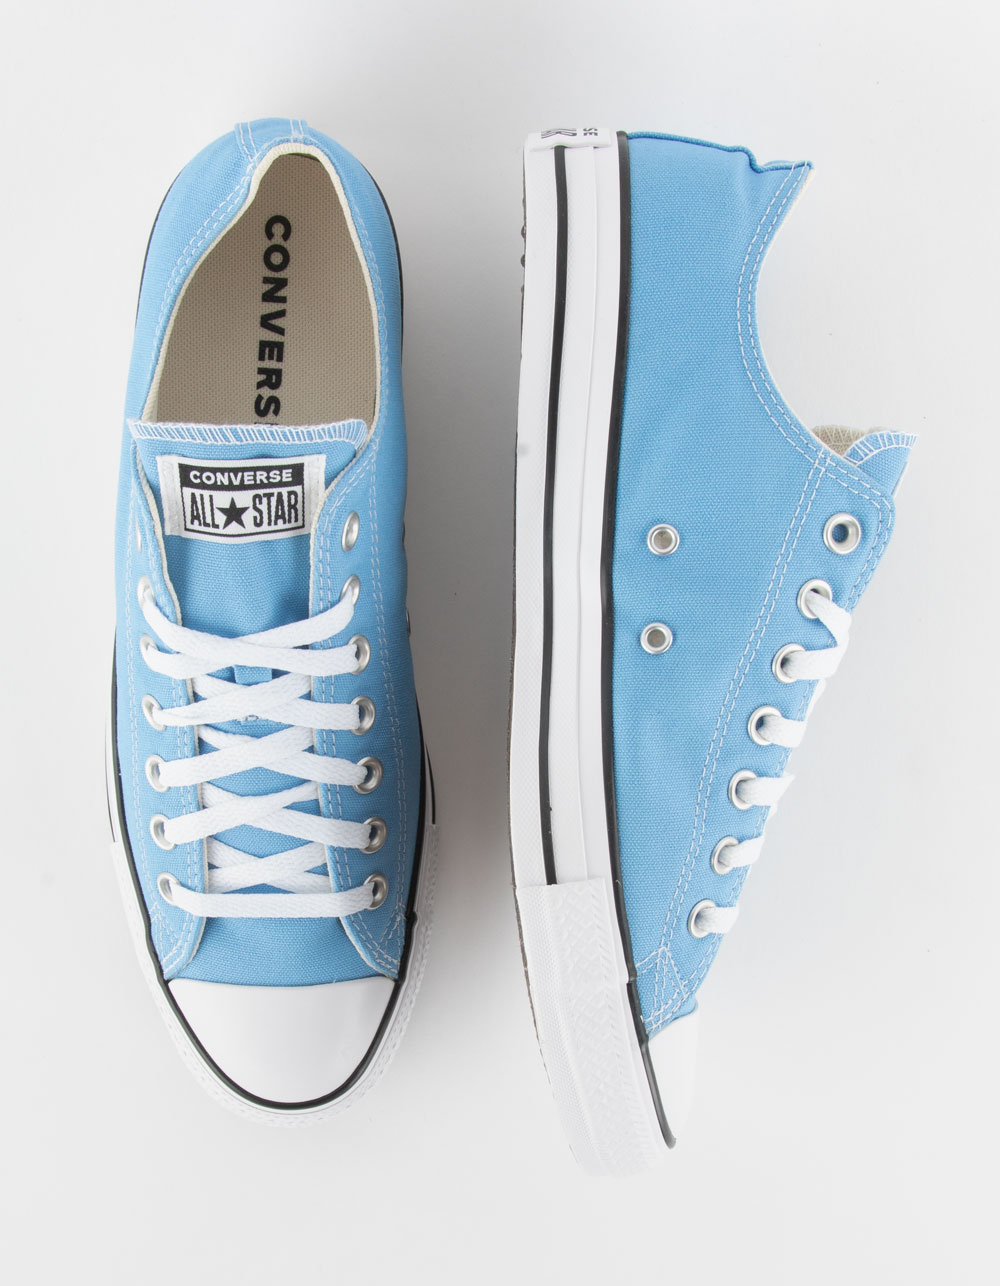 Converse Chuck Taylor All Star Low Top Unisex Shoes.